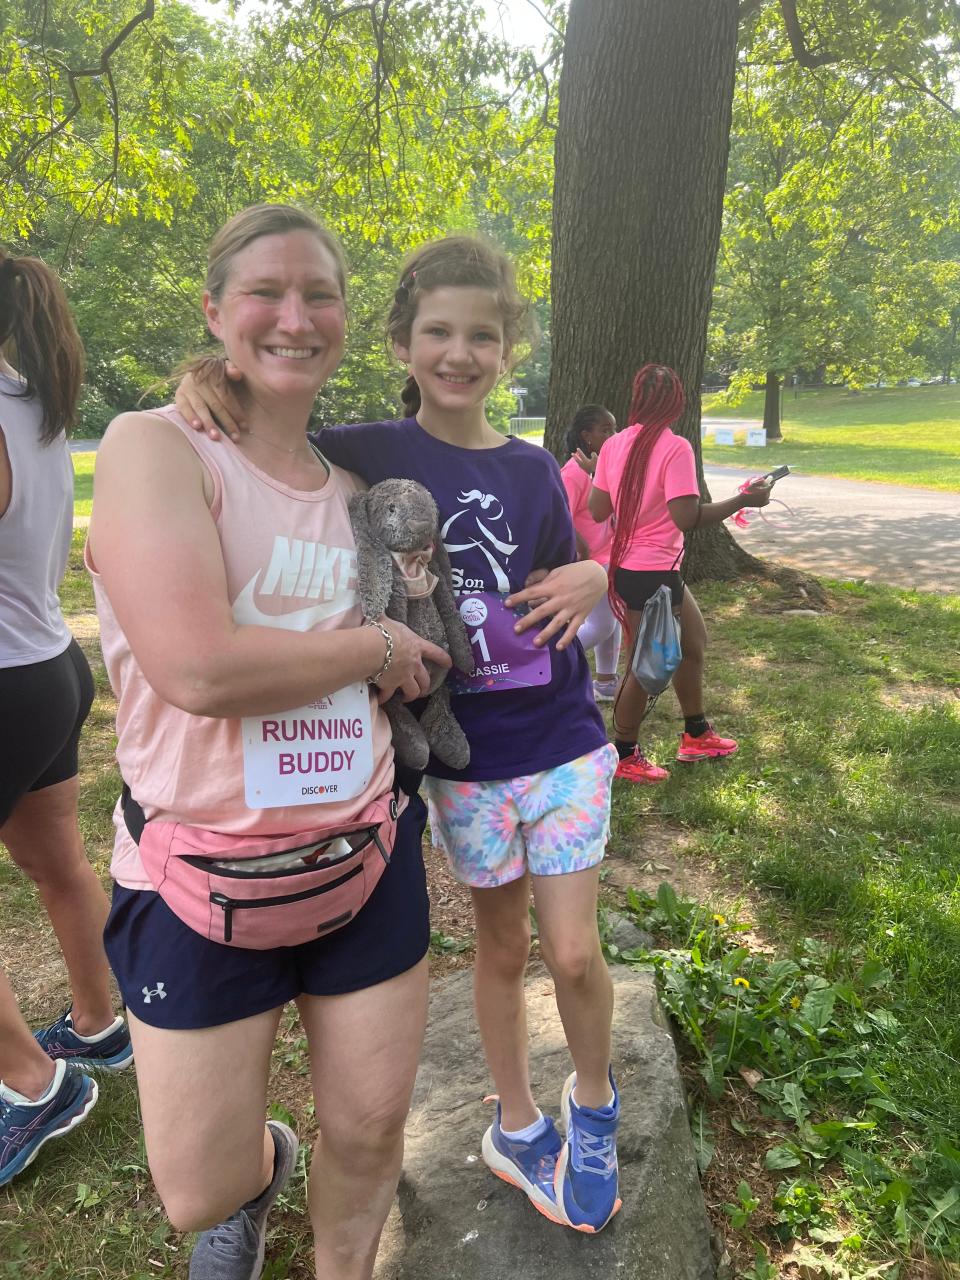 Cassie and her mom, Elizabeth DeChene, completed a 5K together as part of Newark Charter's Girls on the Run group.